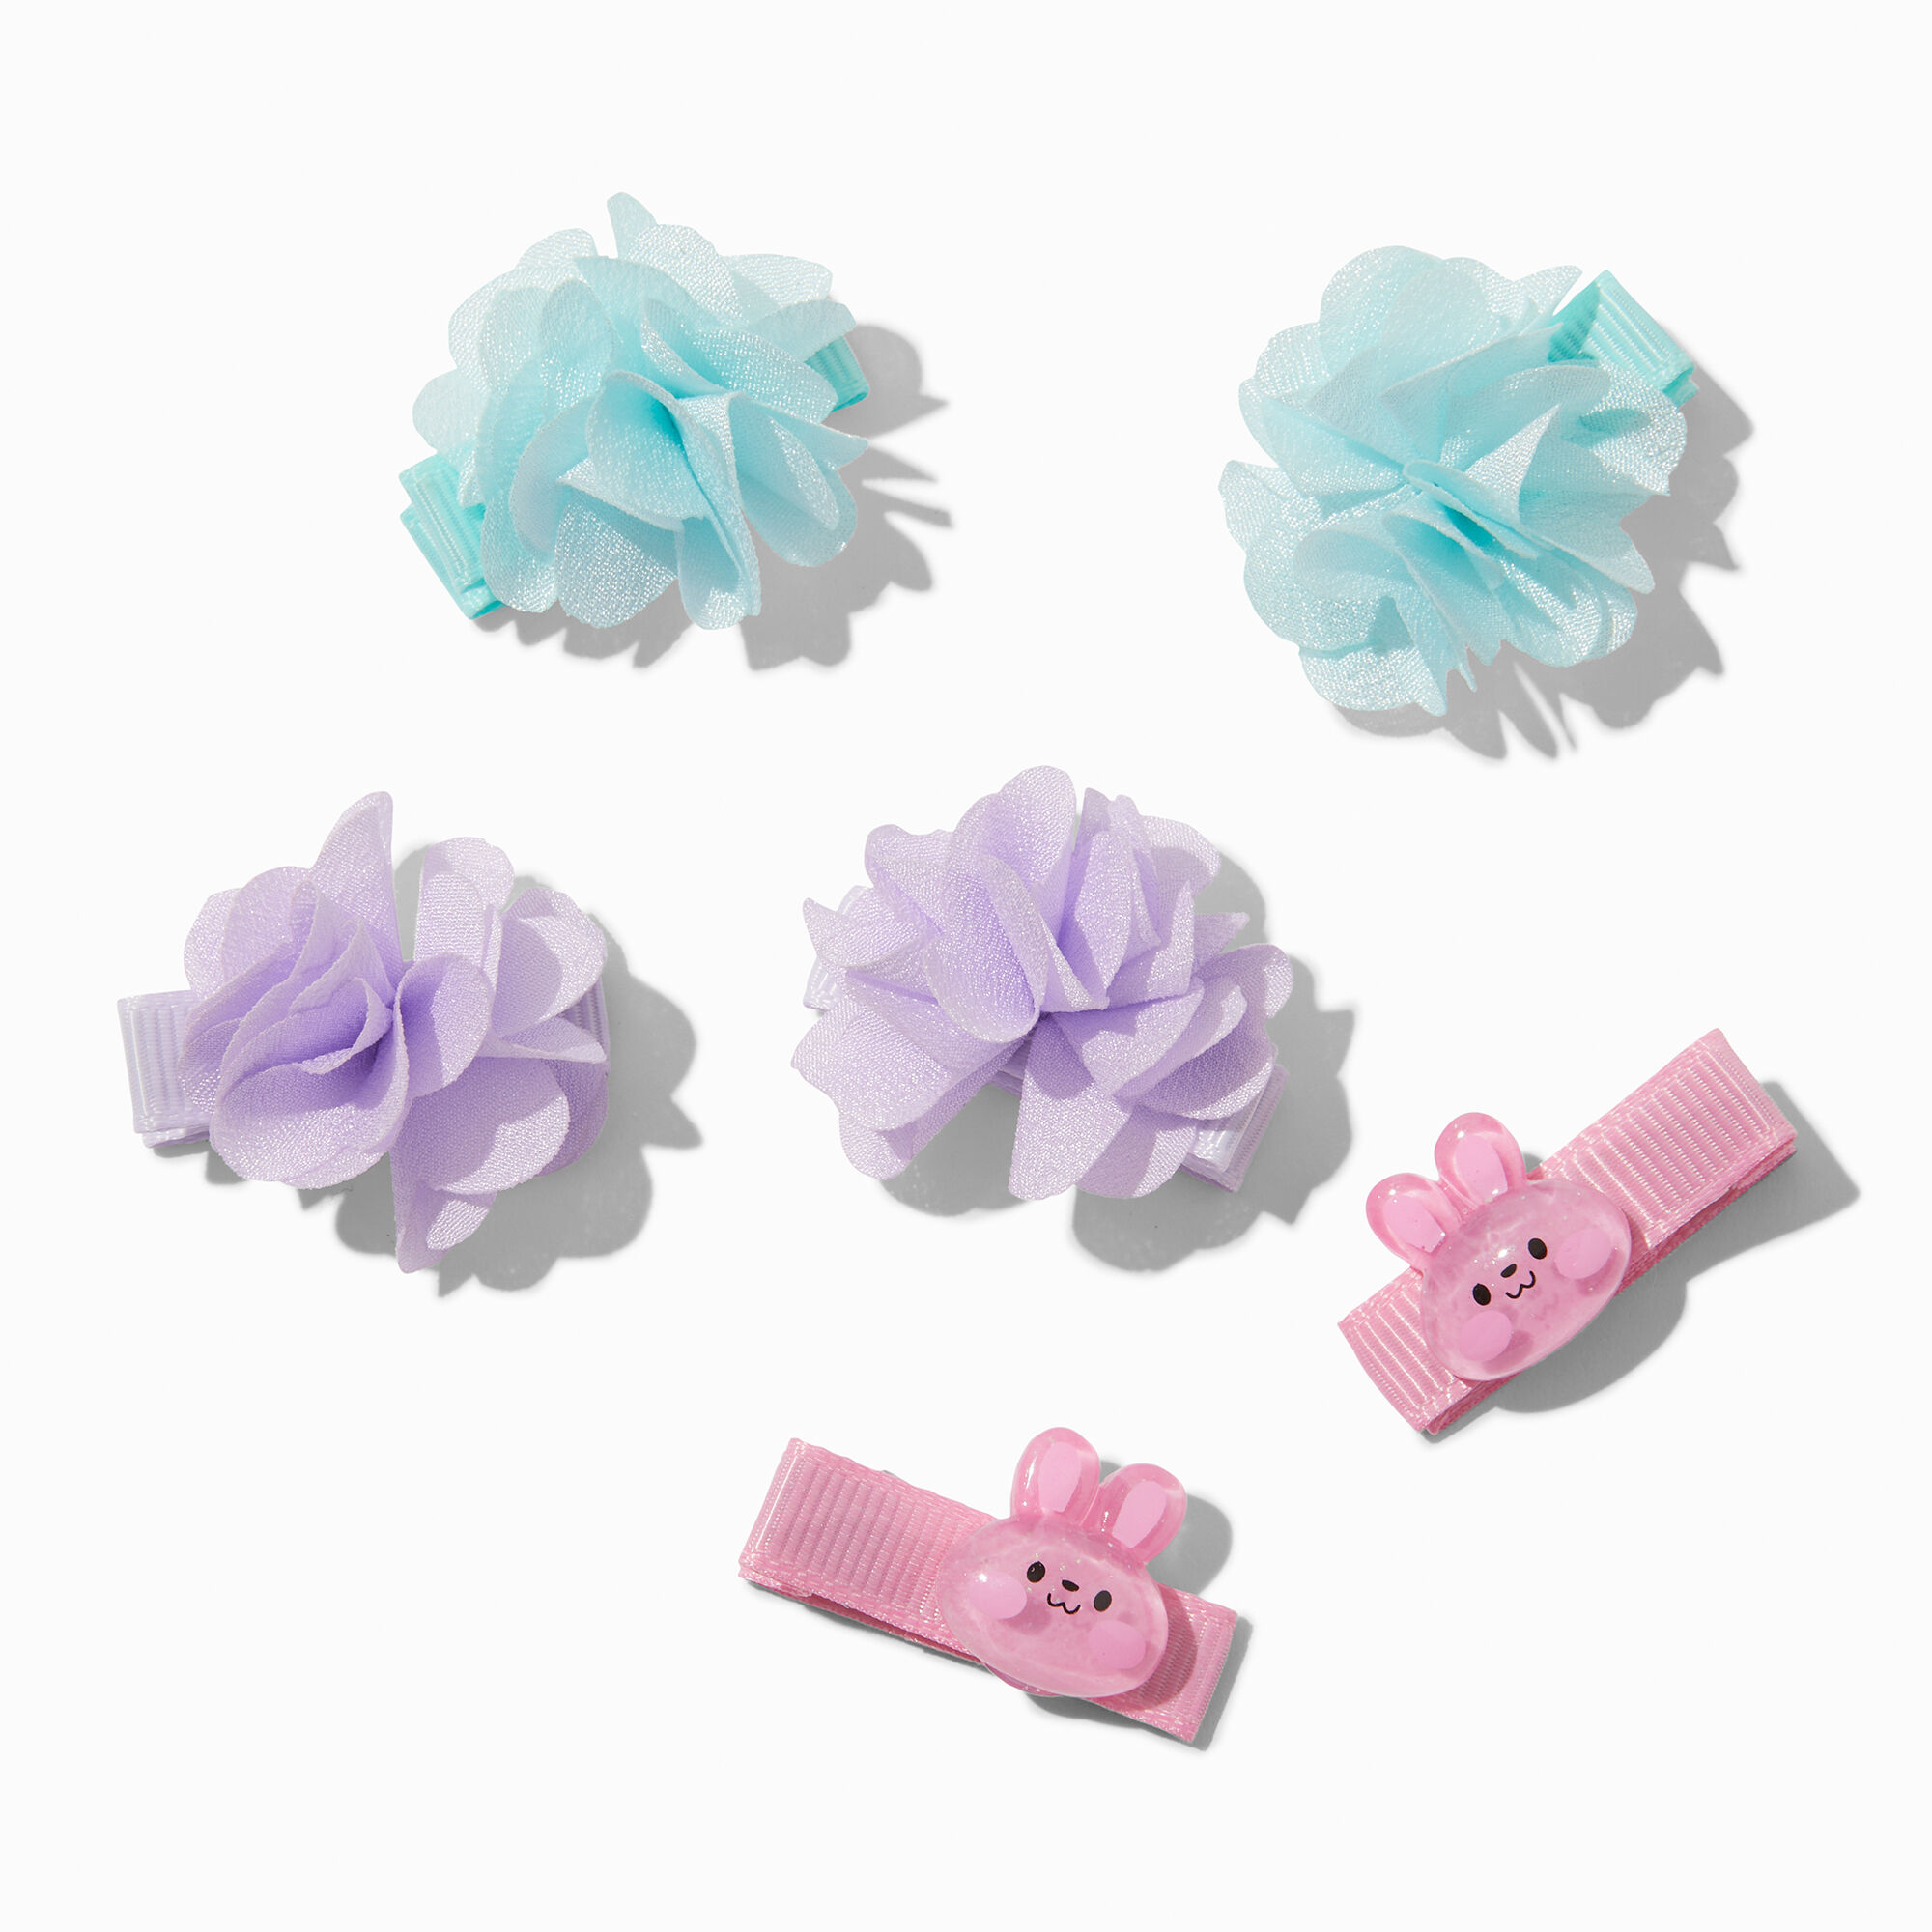 View Claires Club Bunny Flower Hair Clips 6 Pack information